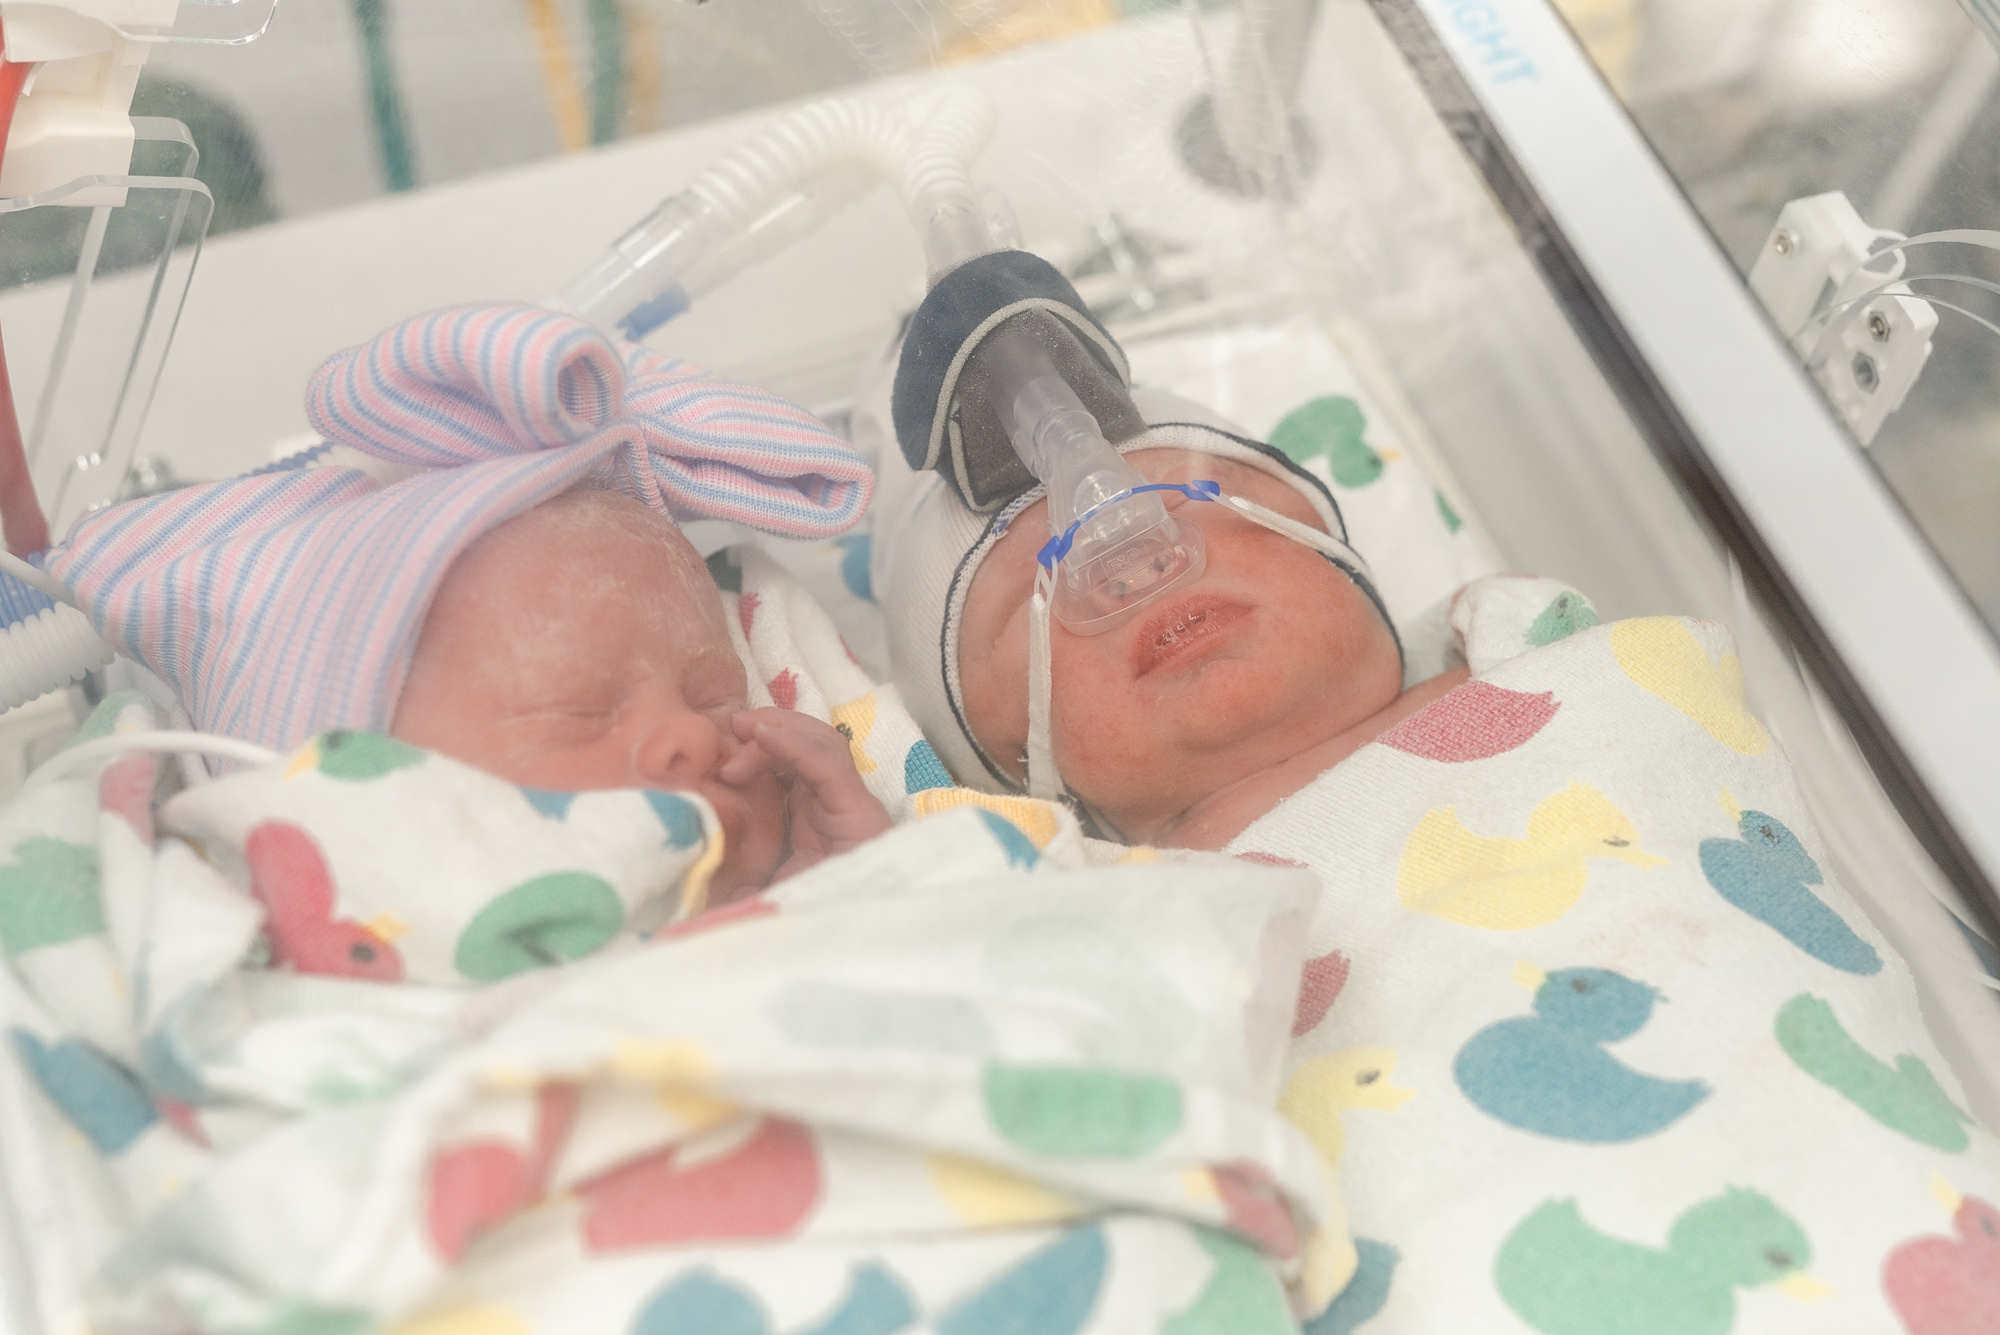 twins lay in hospital bed in NICU post delivery 